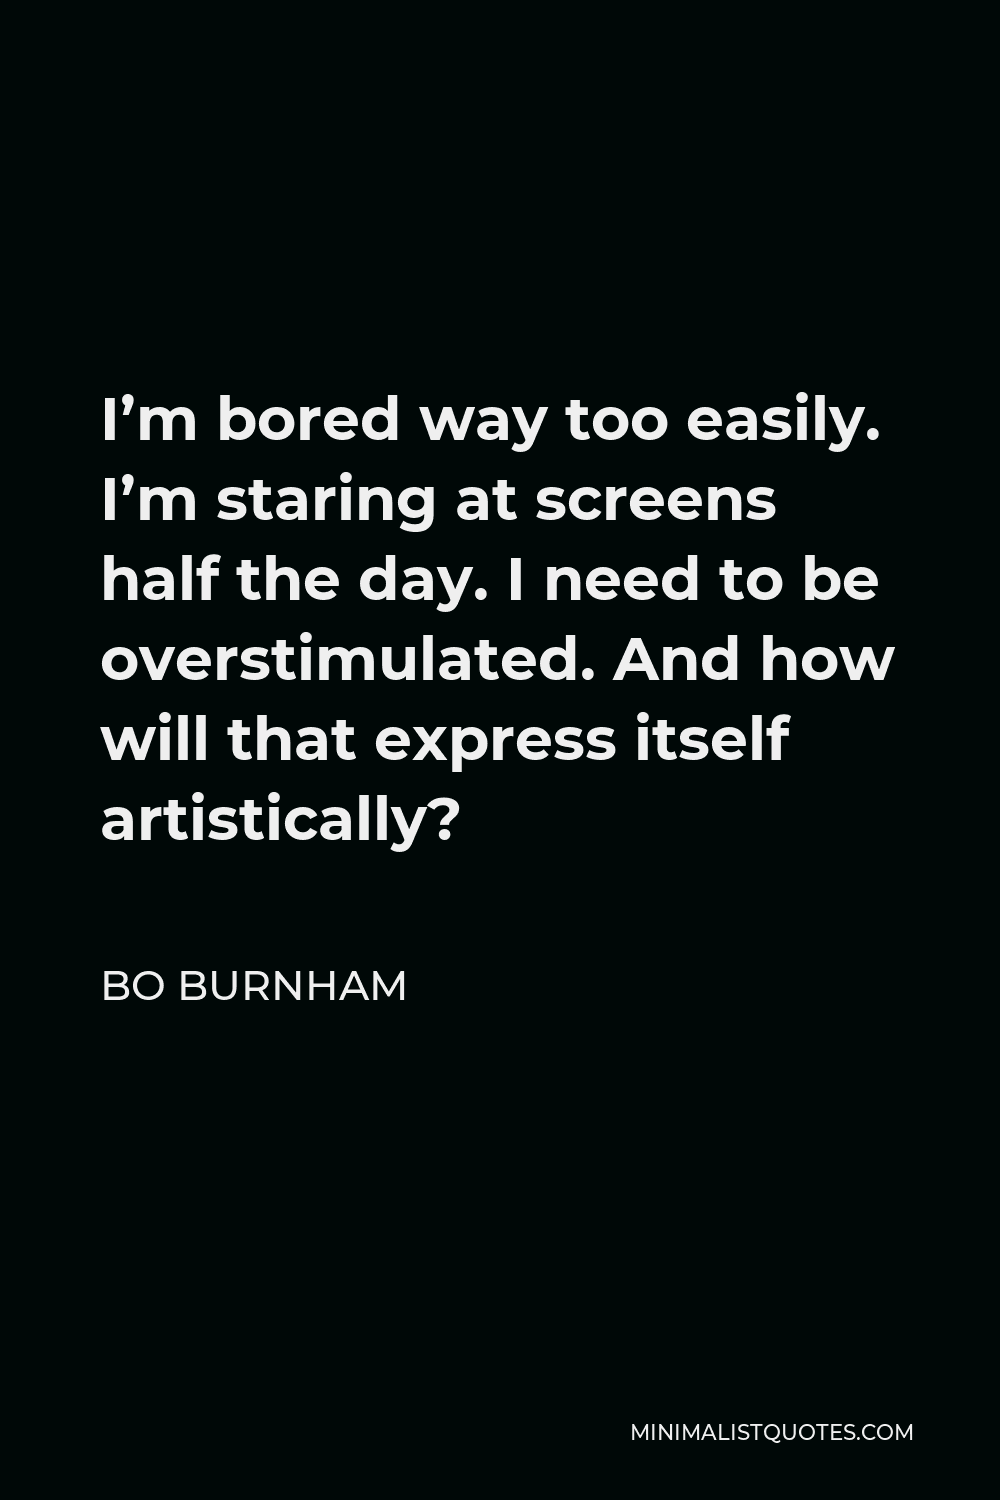 Bo Burnham Quote - I’m bored way too easily. I’m staring at screens half the day. I need to be overstimulated. And how will that express itself artistically?